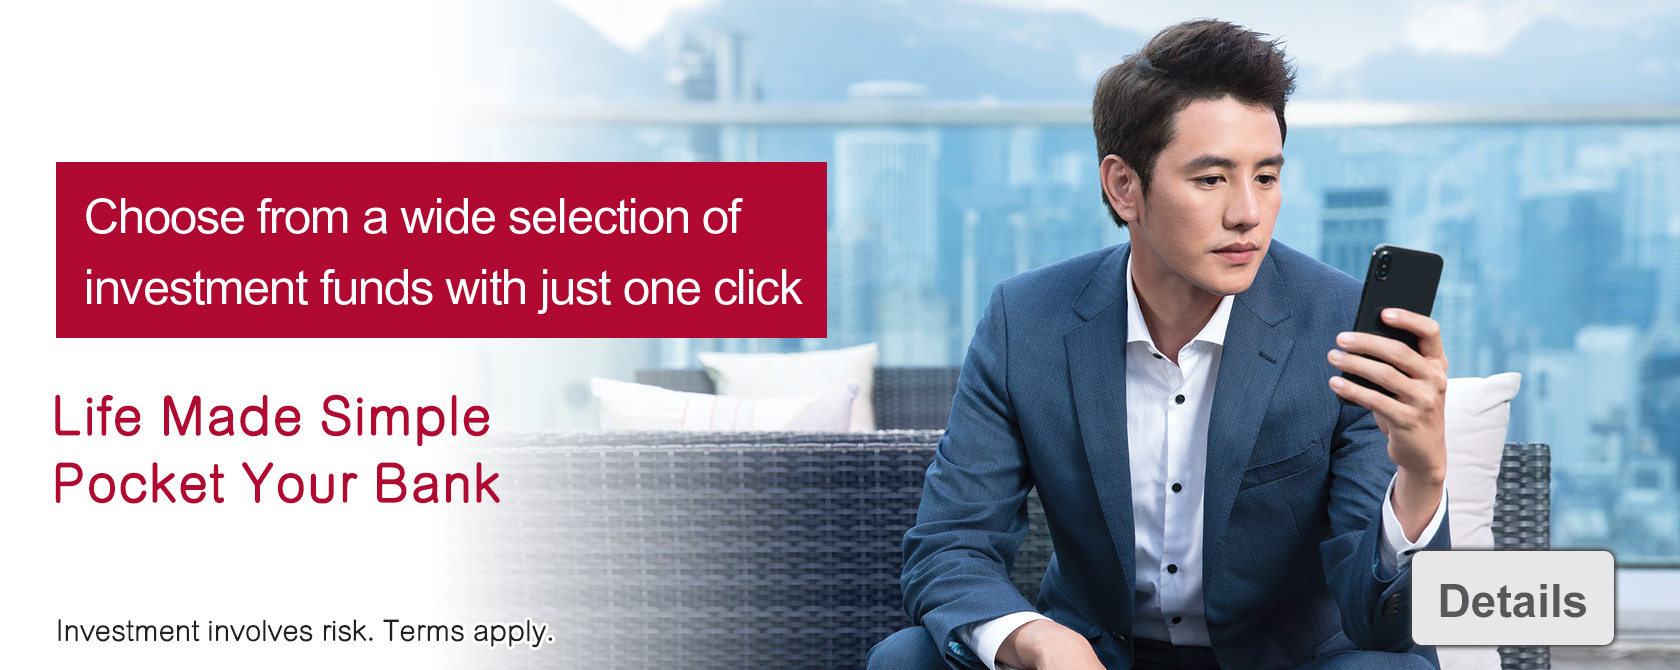 Choose from a wide selection of investment funds with just one click